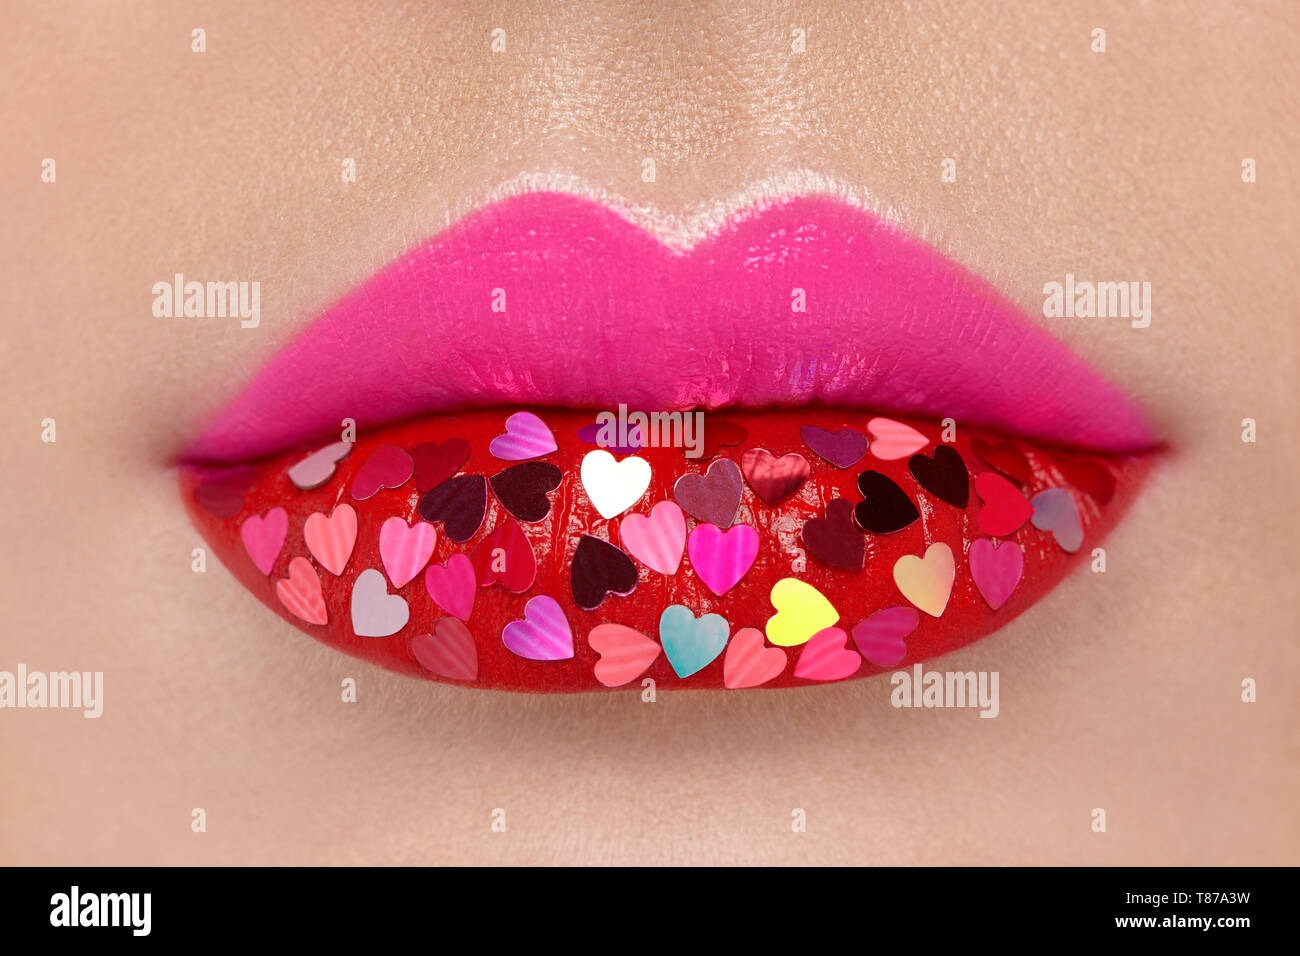 Beautiful Plump Pink Lips with pasted Hearts. Beauty Sexy Lips with Red  Lipstick. Valentine's Day. Beautiful Love Make-up Stock Photo - Alamy